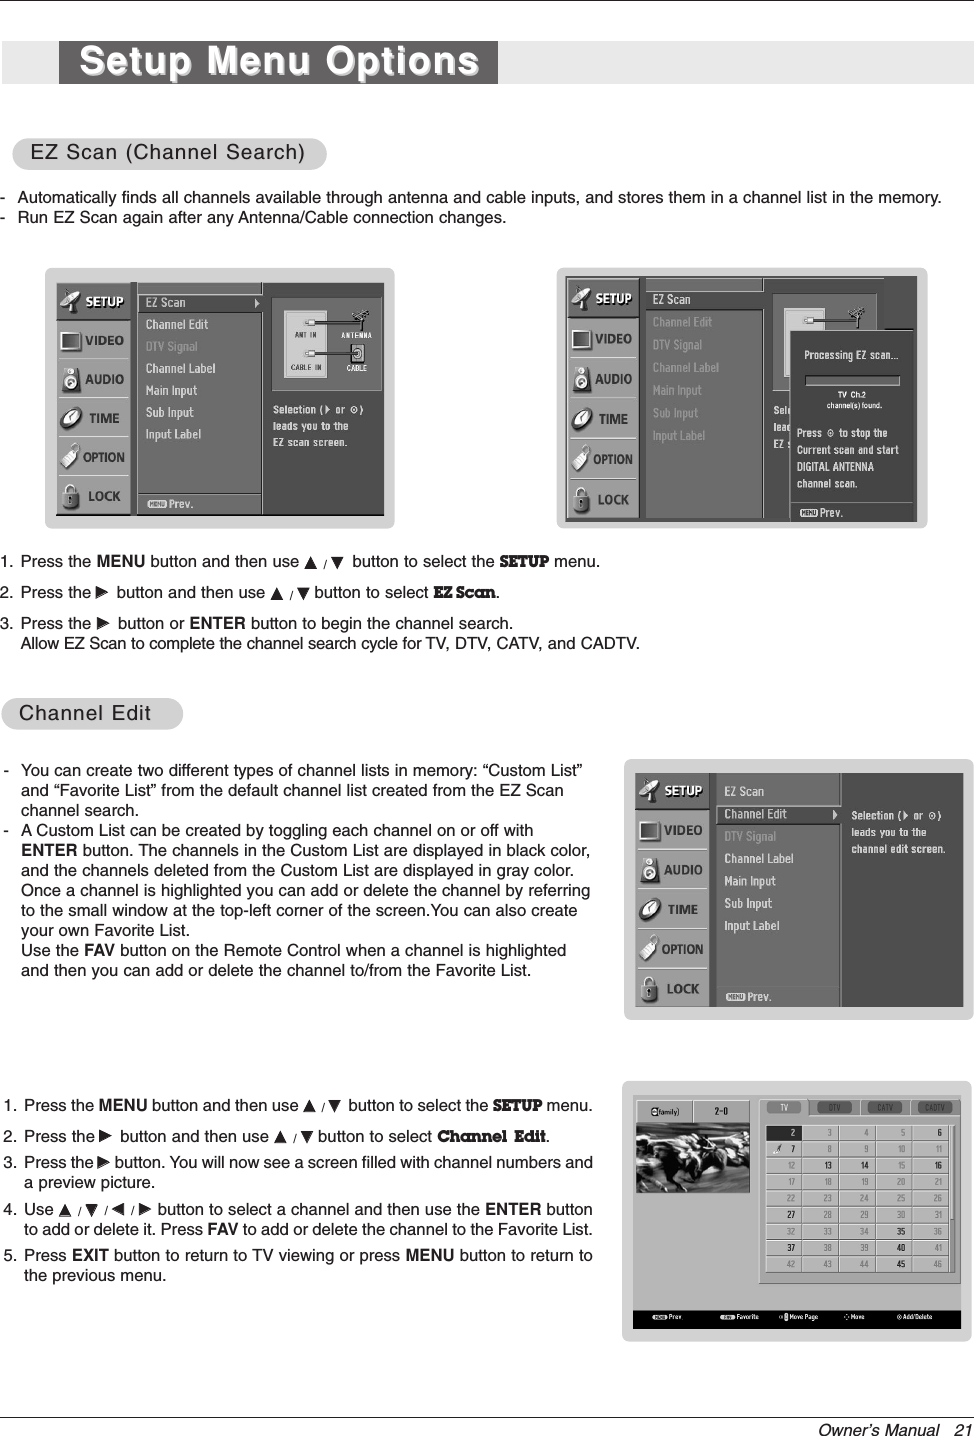 Owner’s Manual   21- You can create two different types of channel lists in memory: “Custom List”and “Favorite List” from the default channel list created from the EZ Scan channel search.- A Custom List can be created by toggling each channel on or off withENTER button. The channels in the Custom List are displayed in black color,and the channels deleted from the Custom List are displayed in gray color.Once a channel is highlighted you can add or delete the channel by referringto the small window at the top-left corner of the screen.You can also createyour own Favorite List. Use the FAV button on the Remote Control when a channel is highlightedand then you can add or delete the channel to/from the Favorite List.1. Press the MENU button and then use DD  / EEbutton to select the SETUP menu.2. Press the GGbutton and then use DD  / EEbutton to select Channel  Edit.3. Press the GGbutton. You will now see a screen filled with channel numbers anda preview picture. 4. Use DD  / EE/ FF  / GG  button to select a channel and then use the ENTER buttonto add or delete it. Press FAV to add or delete the channel to the Favorite List.5. Press EXIT button to return to TV viewing or press MENU button to return tothe previous menu.Channel EditChannel Edit- Automatically finds all channels available through antenna and cable inputs, and stores them in a channel list in the memory.- Run EZ Scan again after any Antenna/Cable connection changes.1. Press the MENU button and then use DD  / EEbutton to select the SETUP menu.2. Press the GGbutton and then use DD  / EEbutton to select EZ Scan.3. Press the GGbutton or ENTER button to begin the channel search.Allow EZ Scan to complete the channel search cycle for TV, DTV, CATV, and CADTV.EZ Scan (Channel Search)EZ Scan (Channel Search)Setup Menu OptionsSetup Menu Options